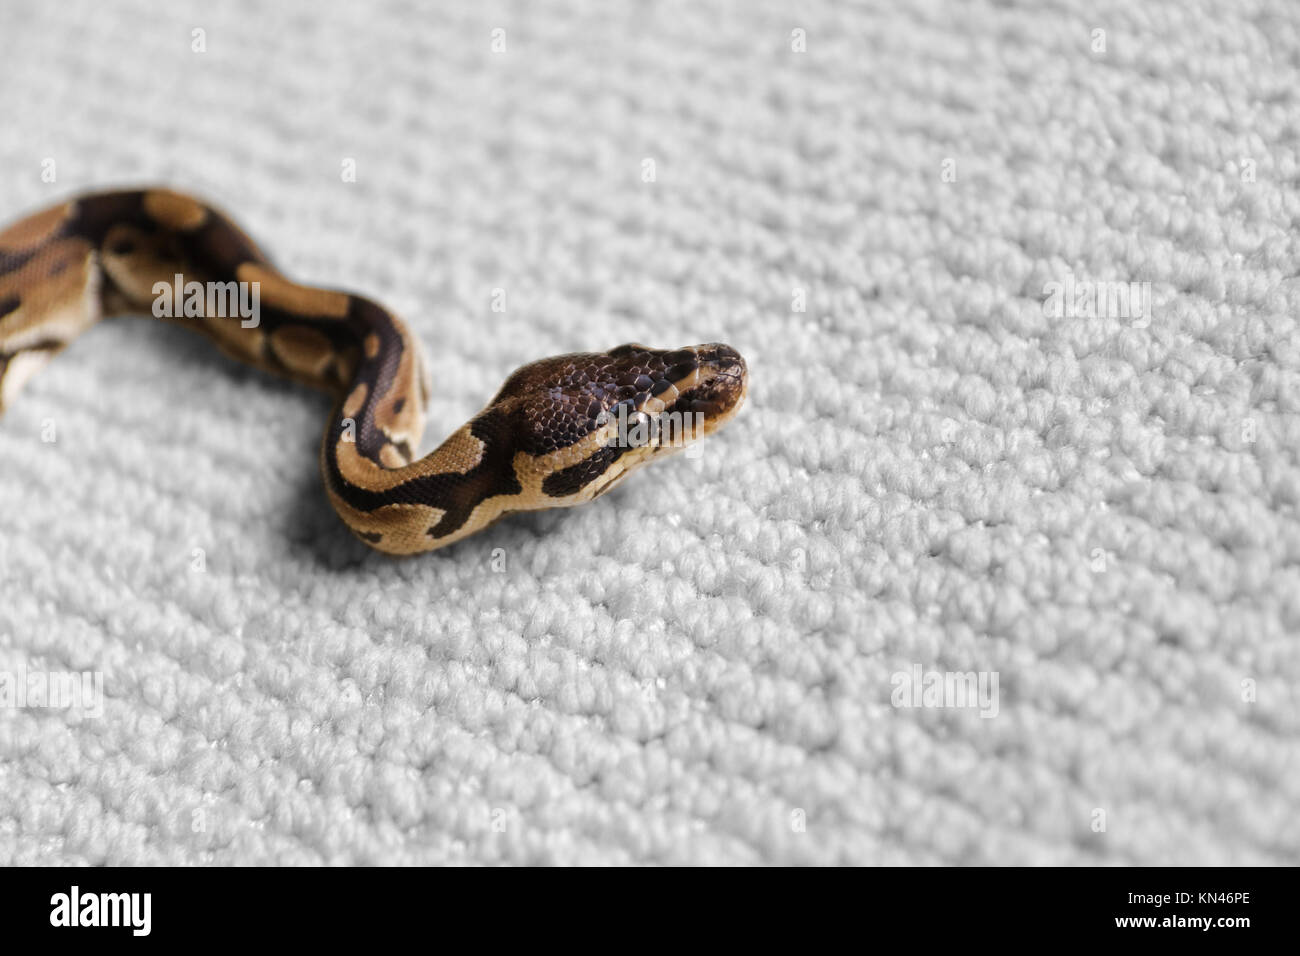 A small ball python snake soaking in a tub of water Stock Photo - Alamy